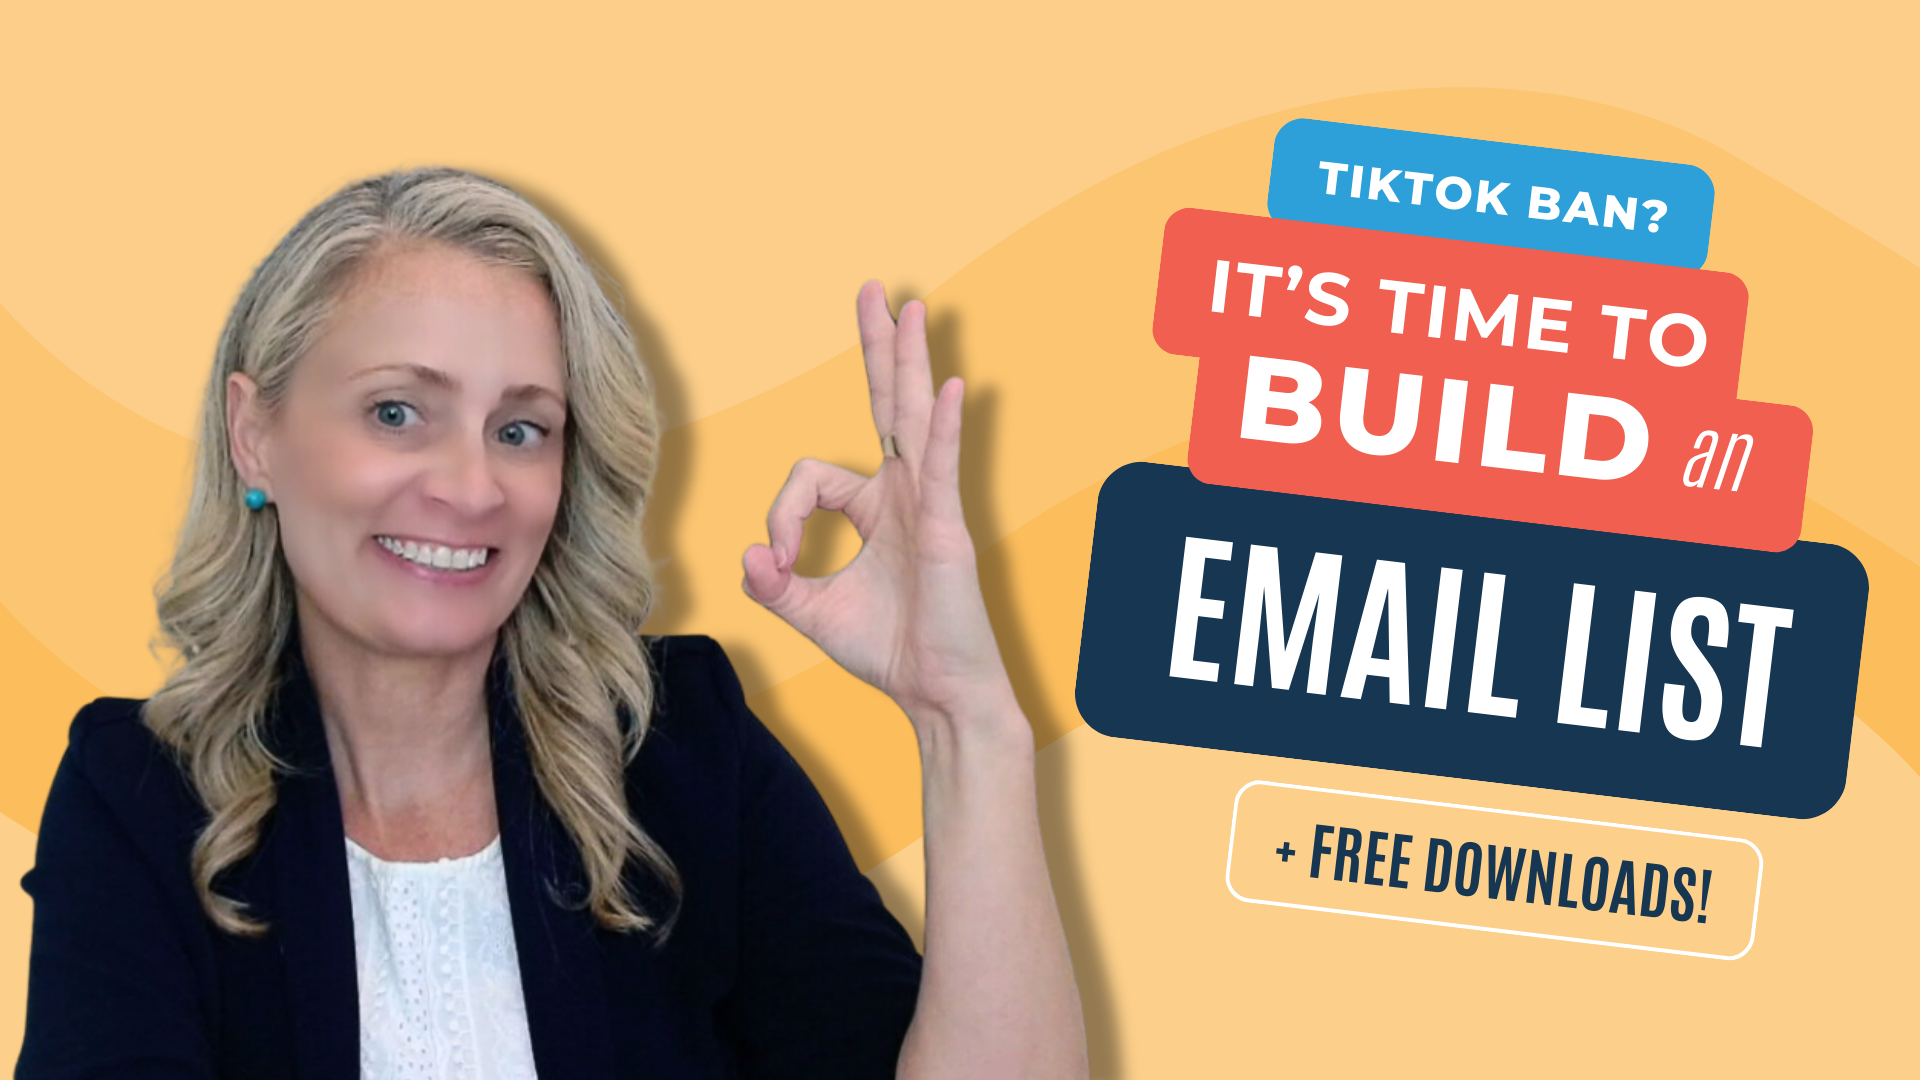 TikTok Ban? It's Time To Build An Email List